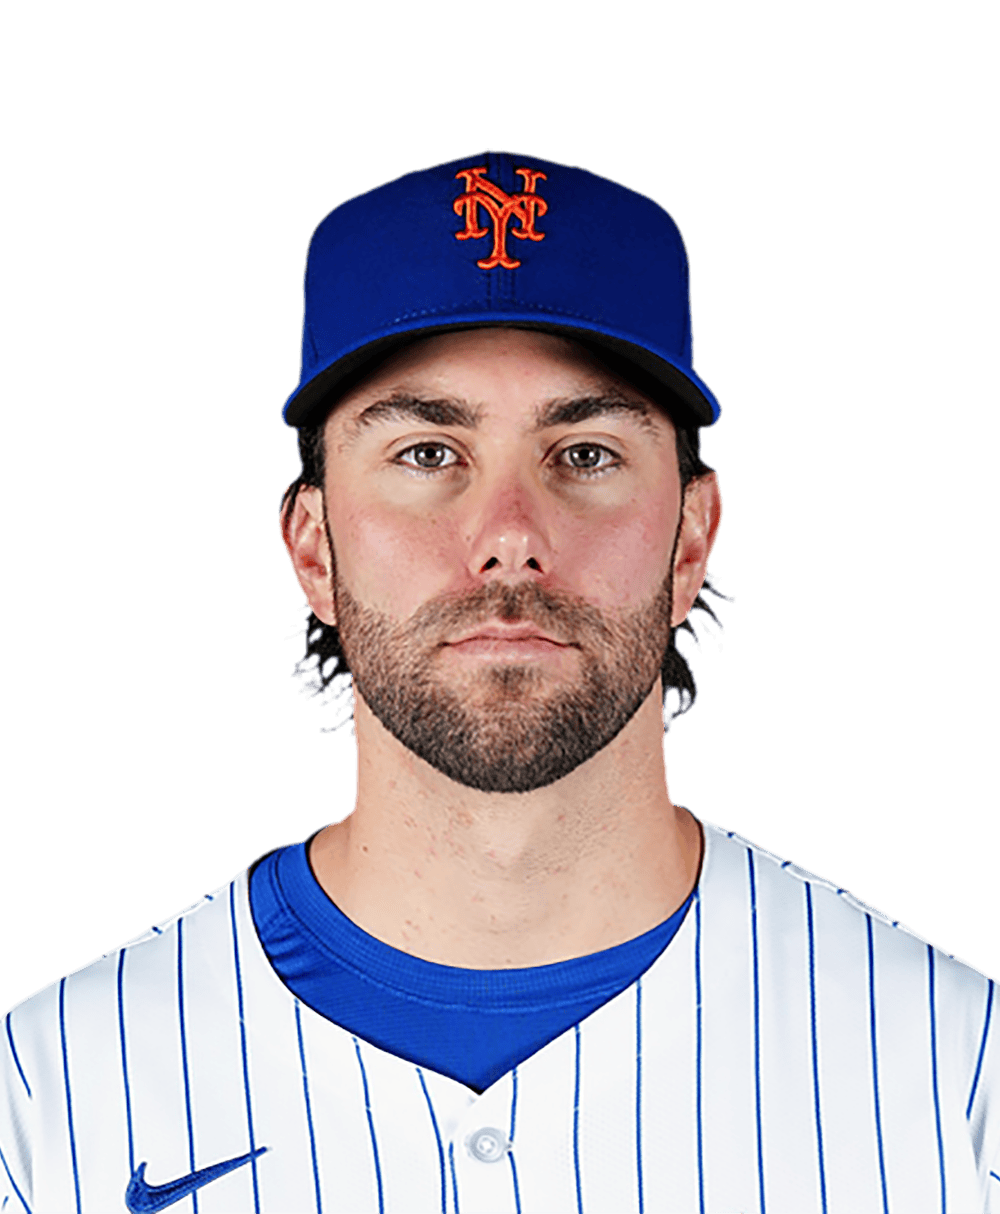 Tylor Megill, David Peterson provide Mets with capable depth